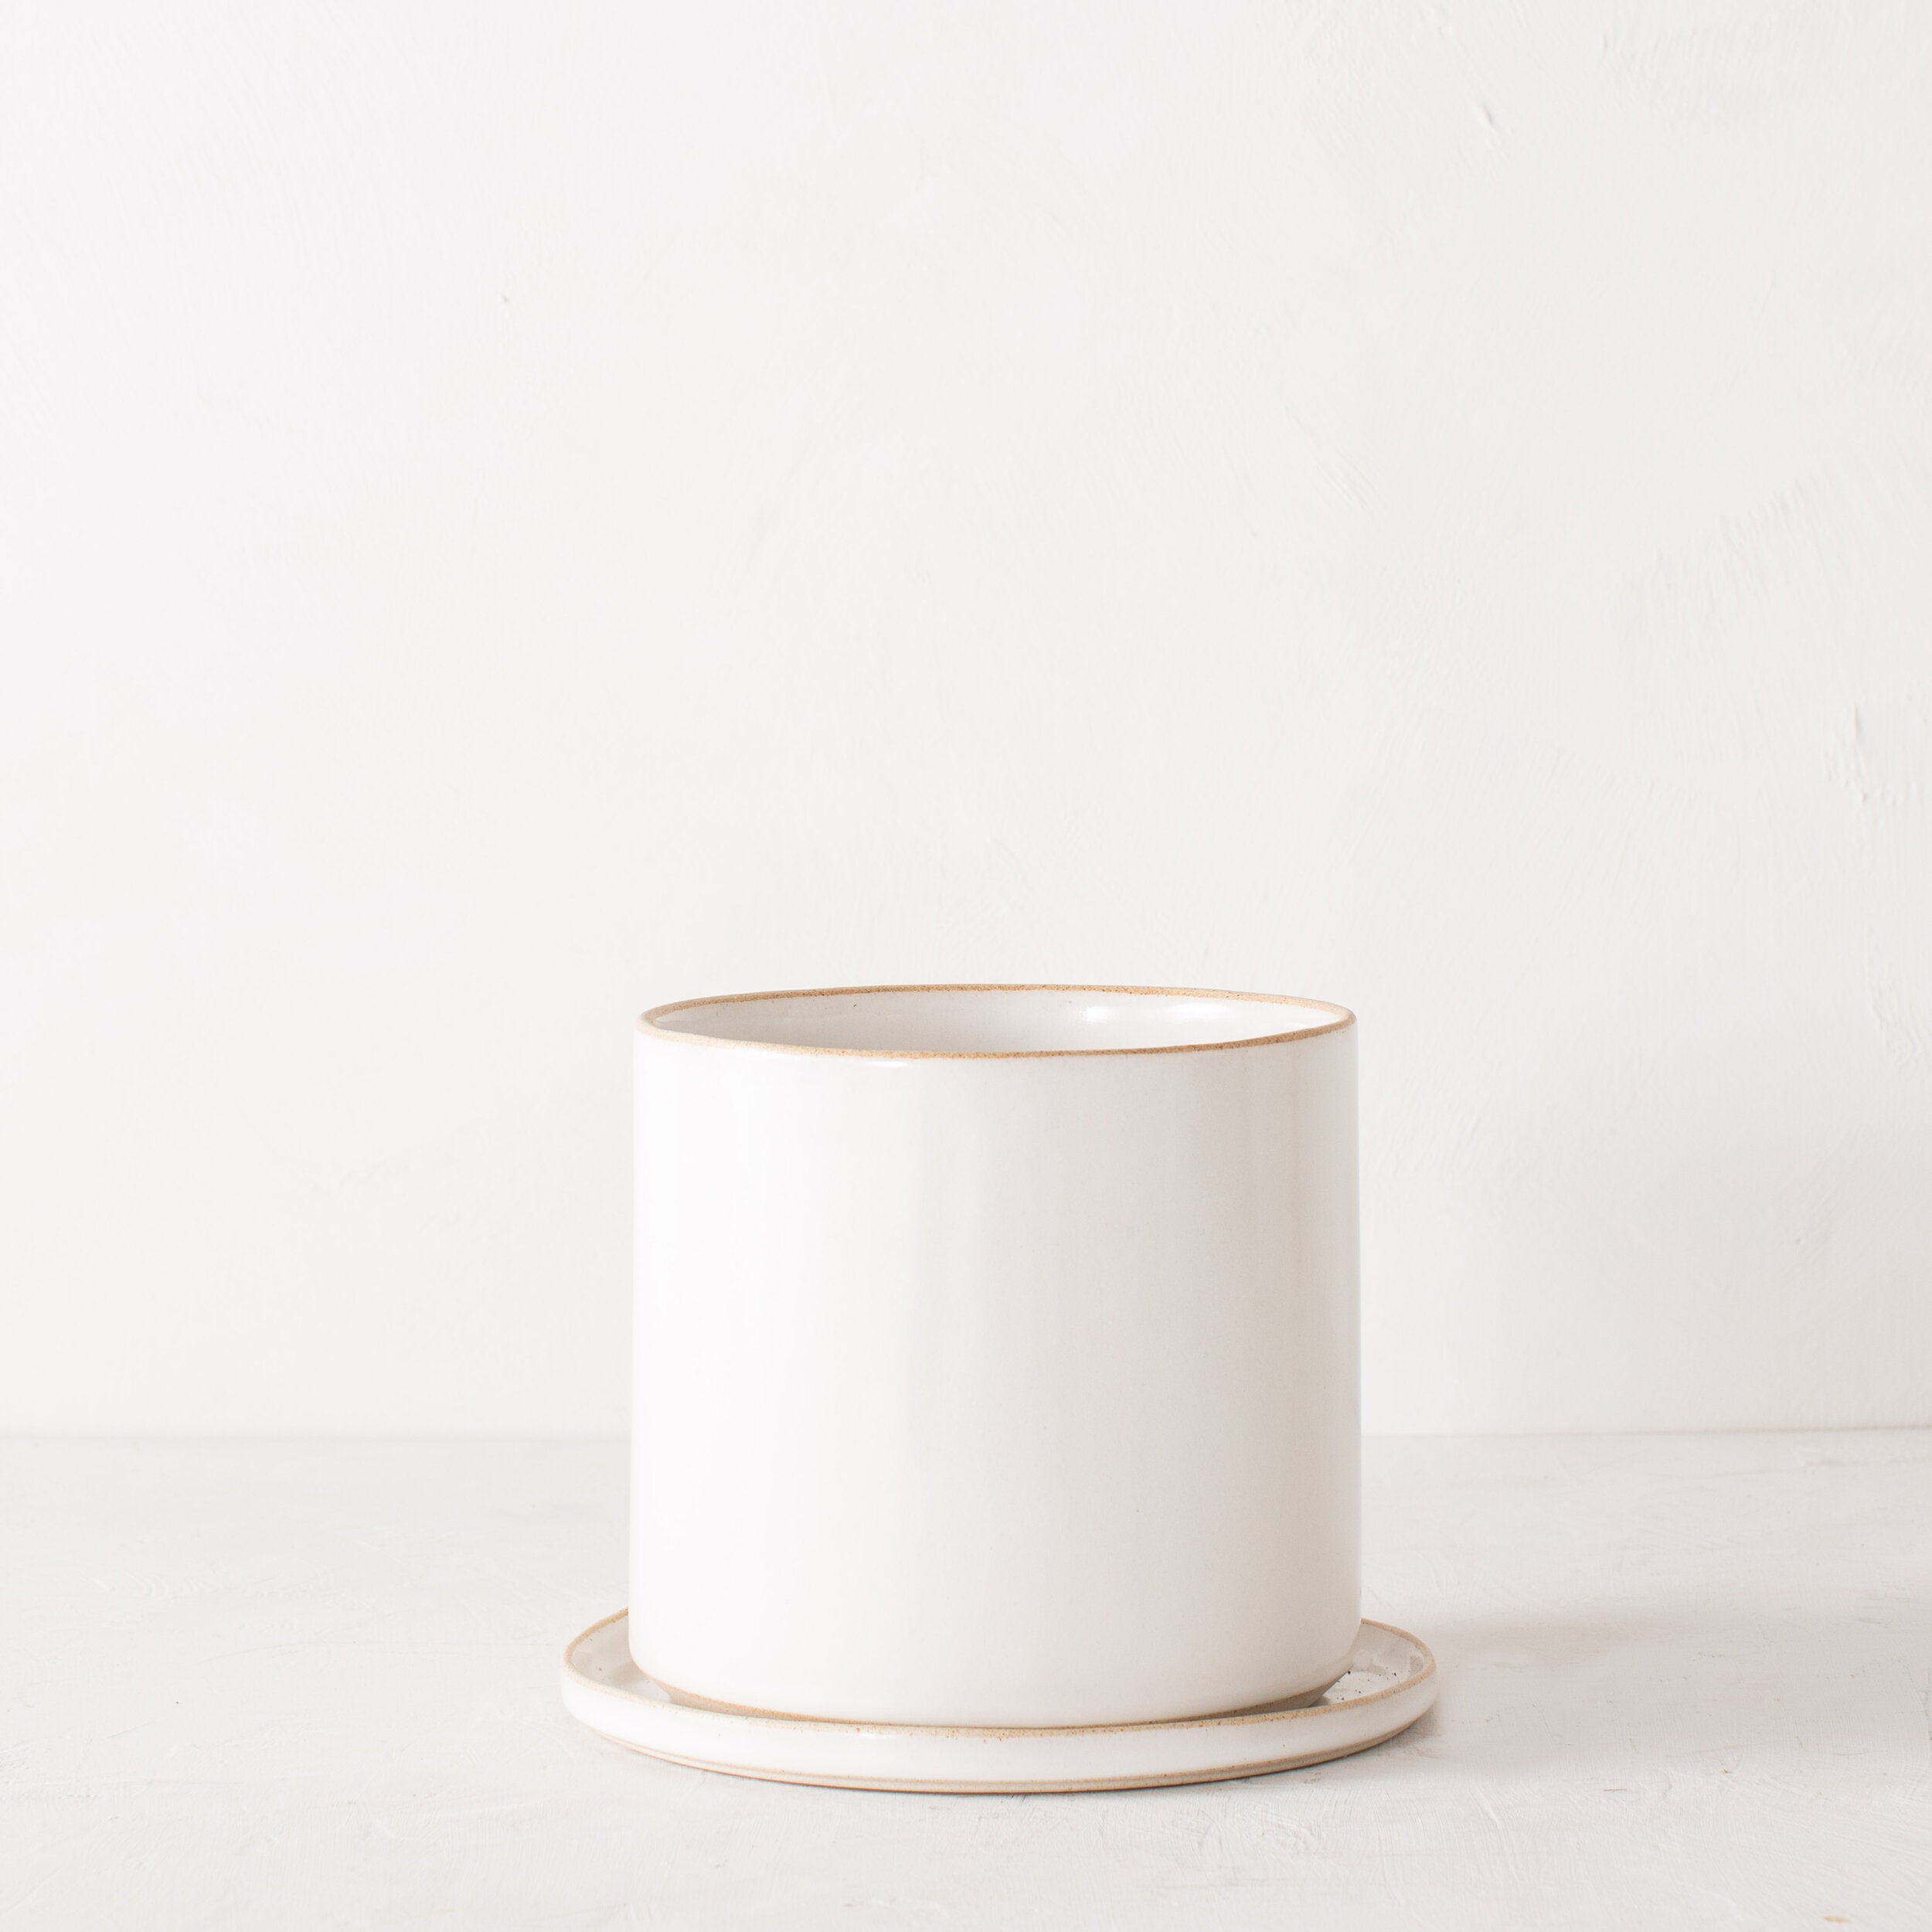 8 inch white ceramic planter with a bottom drainage dish. Staged on a white plaster textured tabletop against a plaster textured white wall. Designed by Convivial Production, sold by Shop Verdant, Kansas City, Mo plant store.